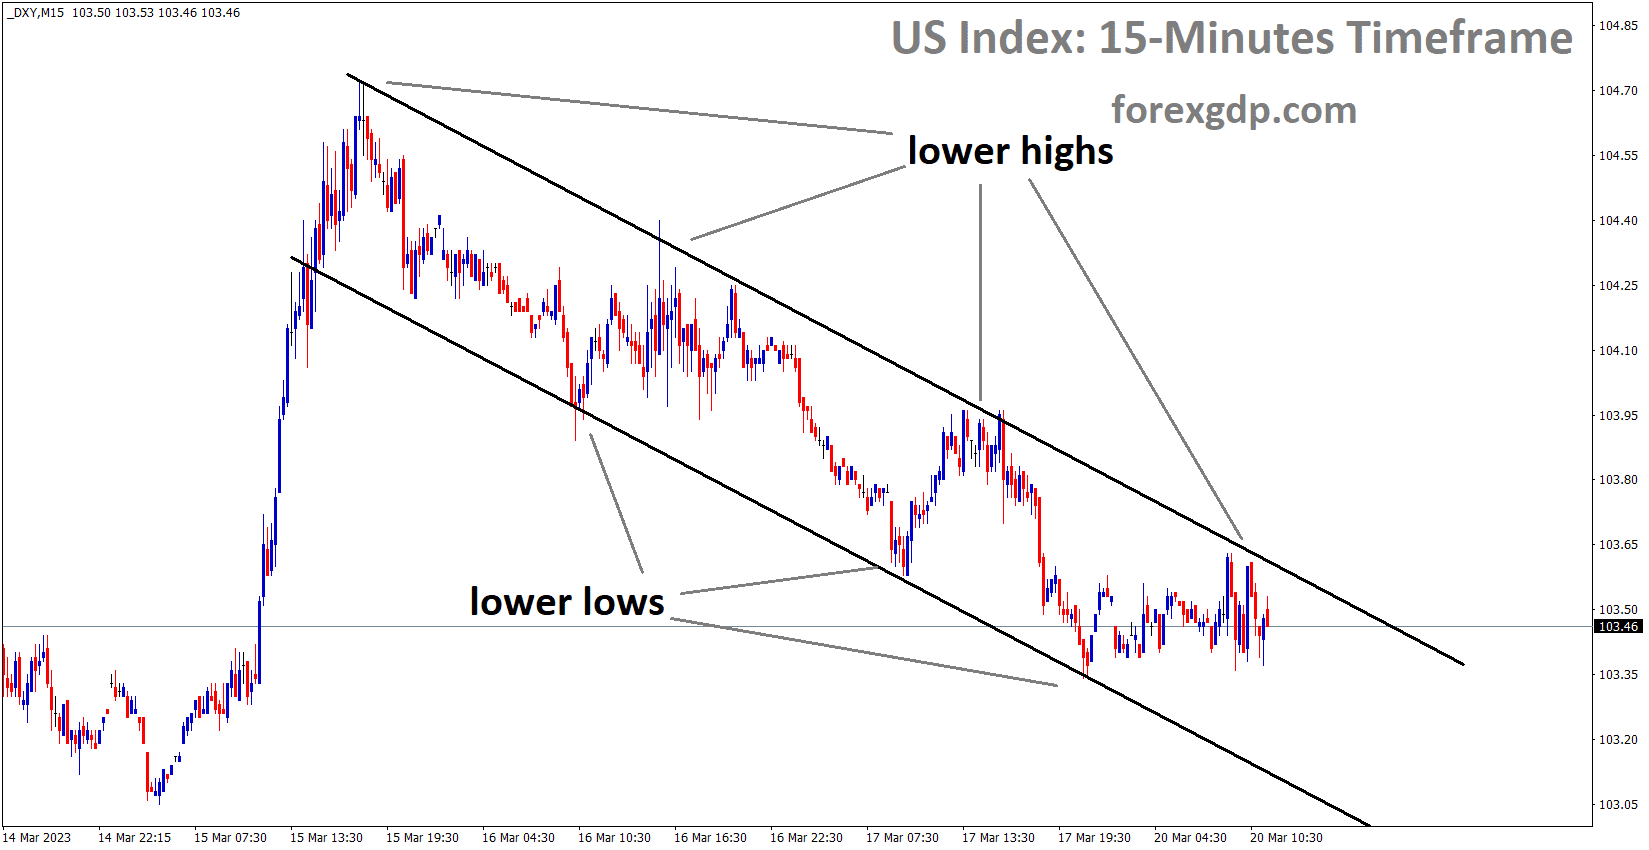 US Dollar Index is moving in the Descending channel and the market has fallen from the lower high area of the channel